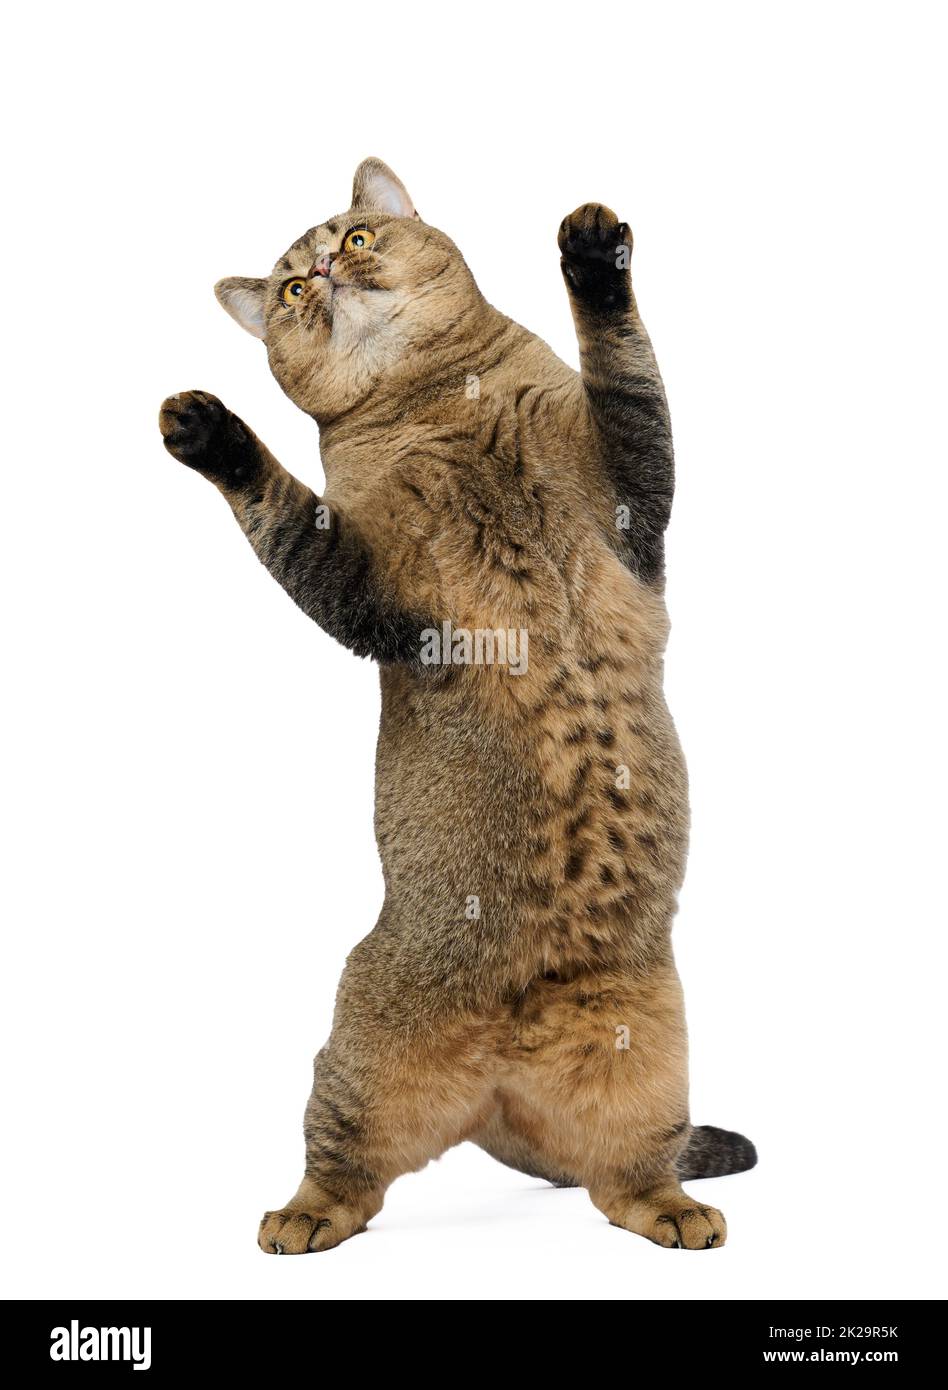 adult gray cat Scottish Straight stands on its hind legs and looks up. playful cute animal Stock Photo